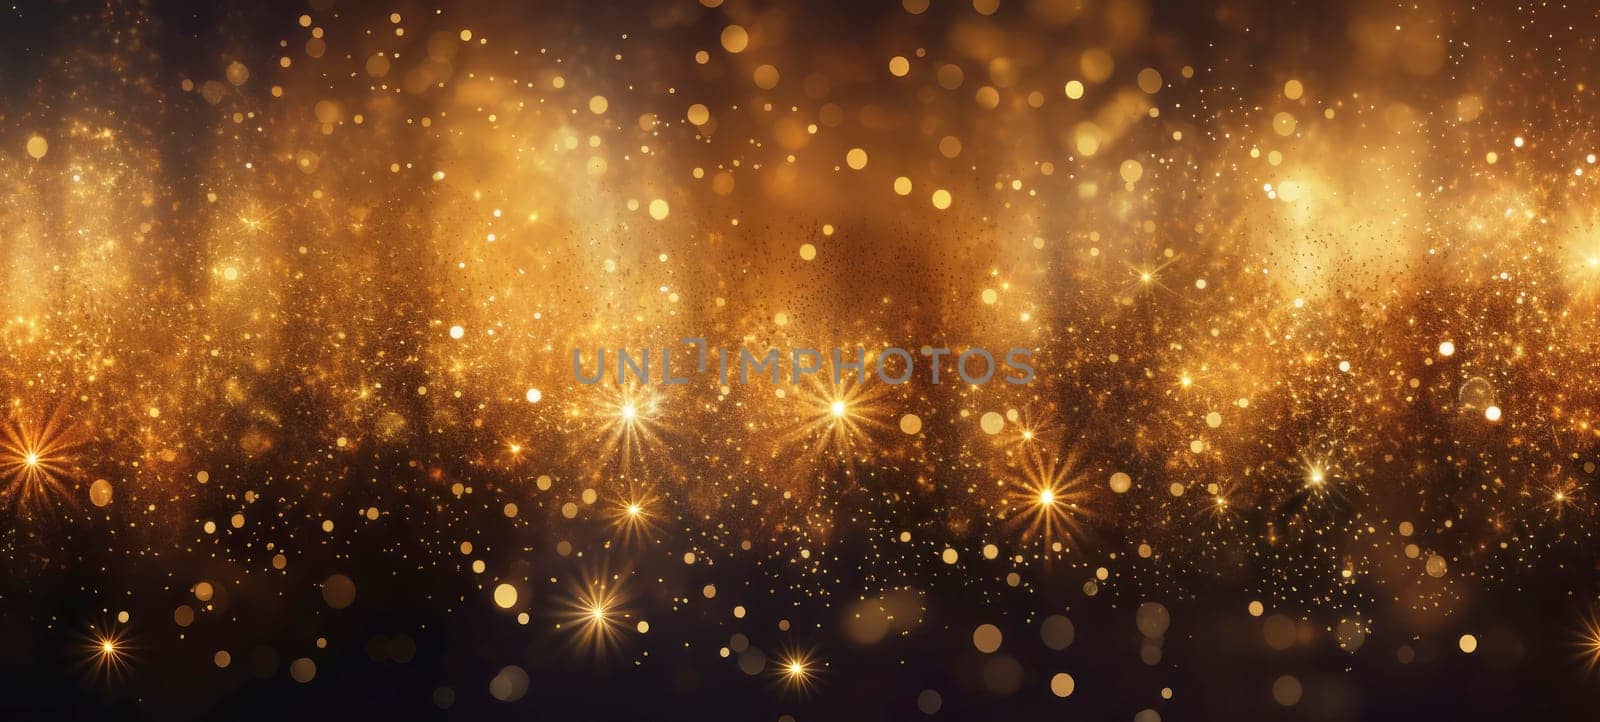 Abstract background with golden fireworks, sparkles, shiny bokeh glitter lights by andreyz